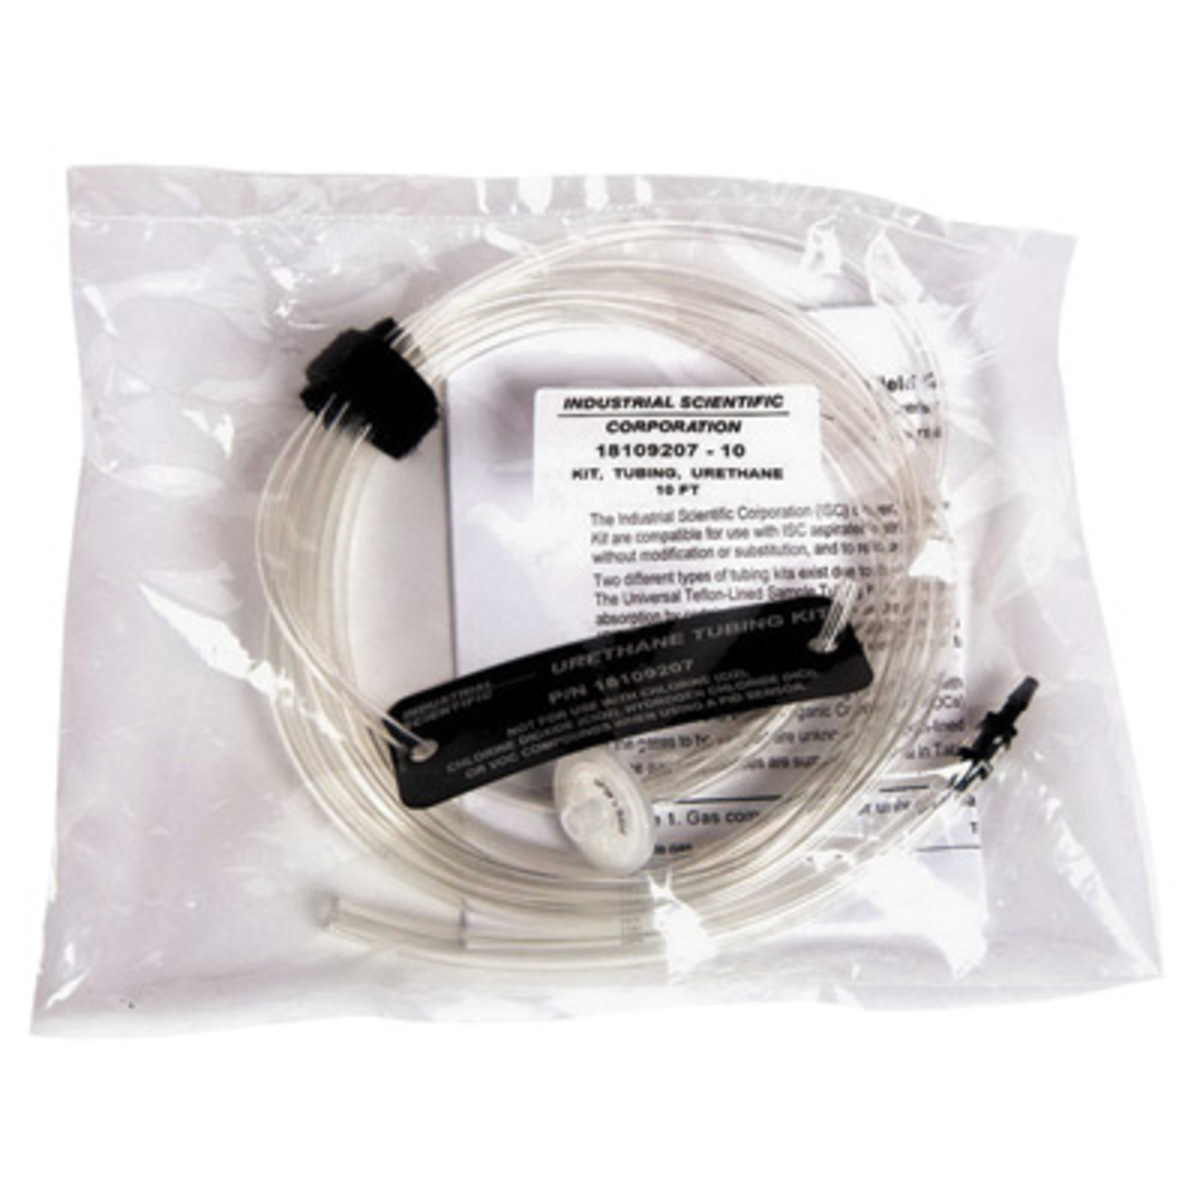 Industrial Scientific 40' Urethane Sampling Tubing/Probe Kit Used With MX6 iBrid™ And Ventis™ MX4 Portable Multi-Gas Monitor